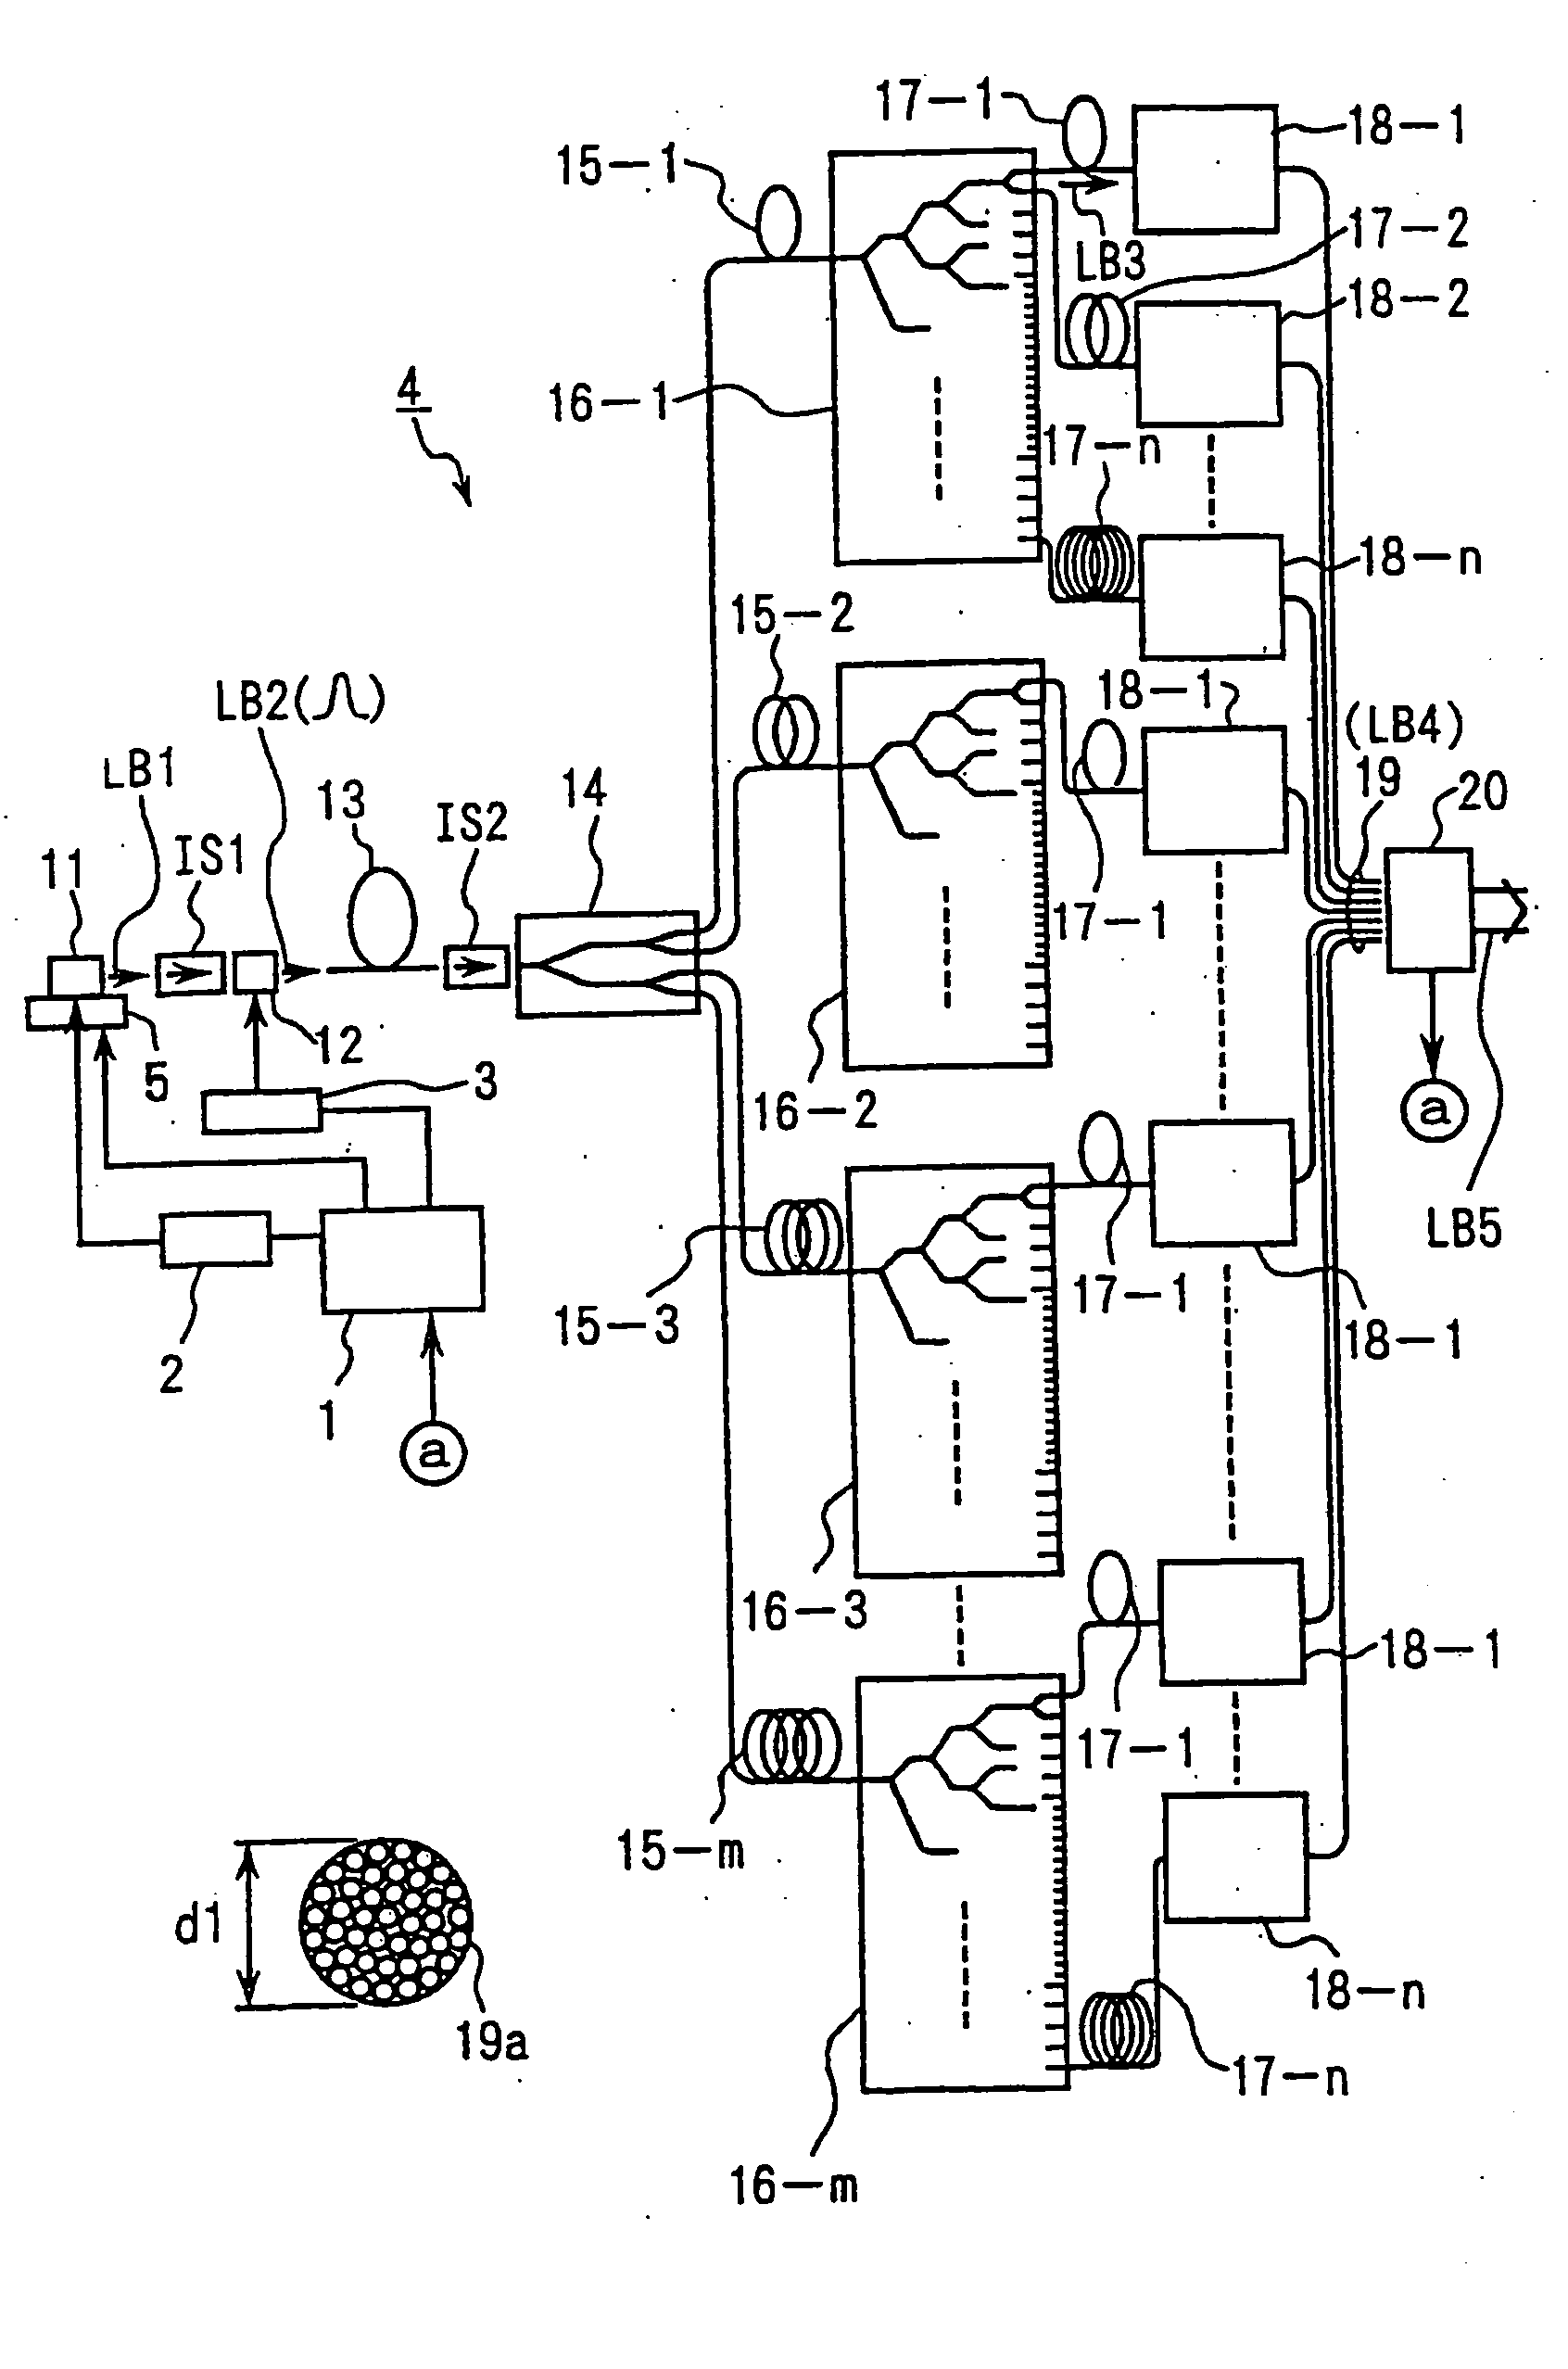 Exposure apparatus with laser device